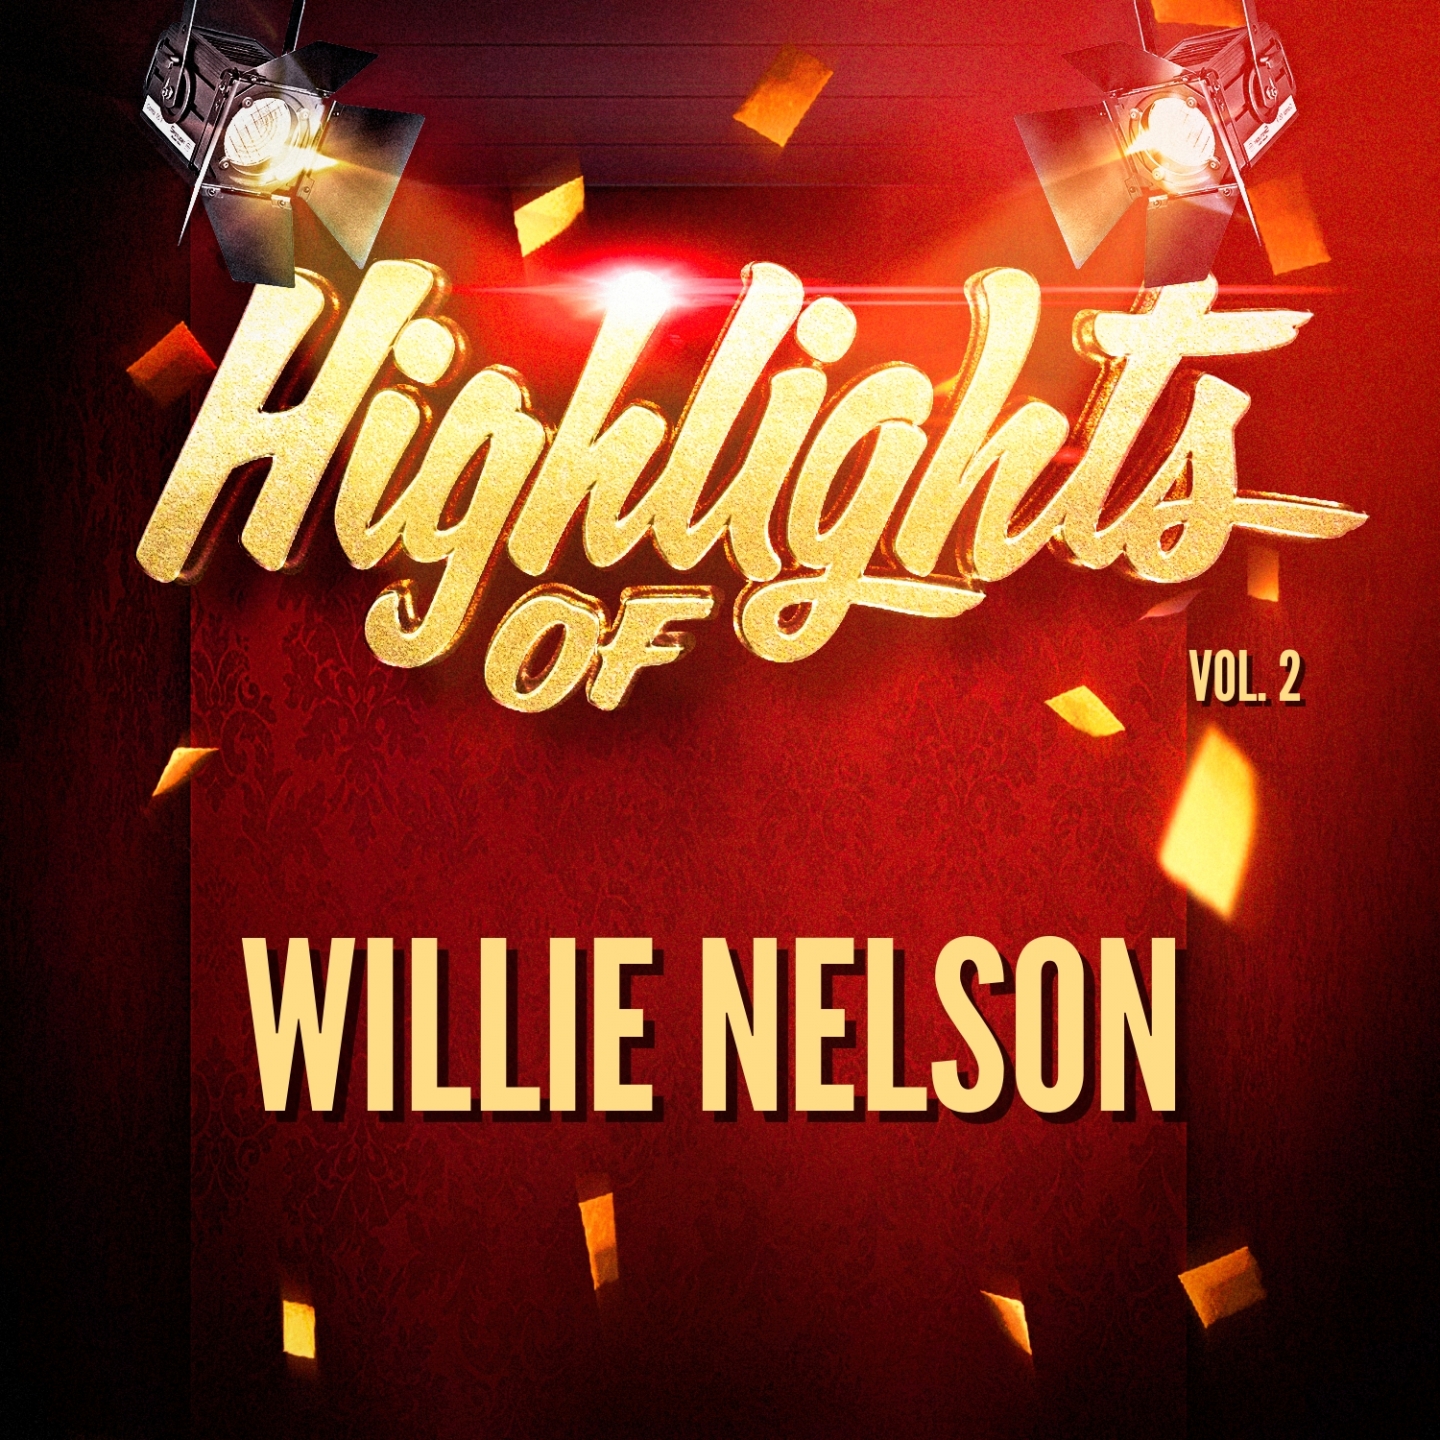 Highlights of Willie Nelson, Vol. 2